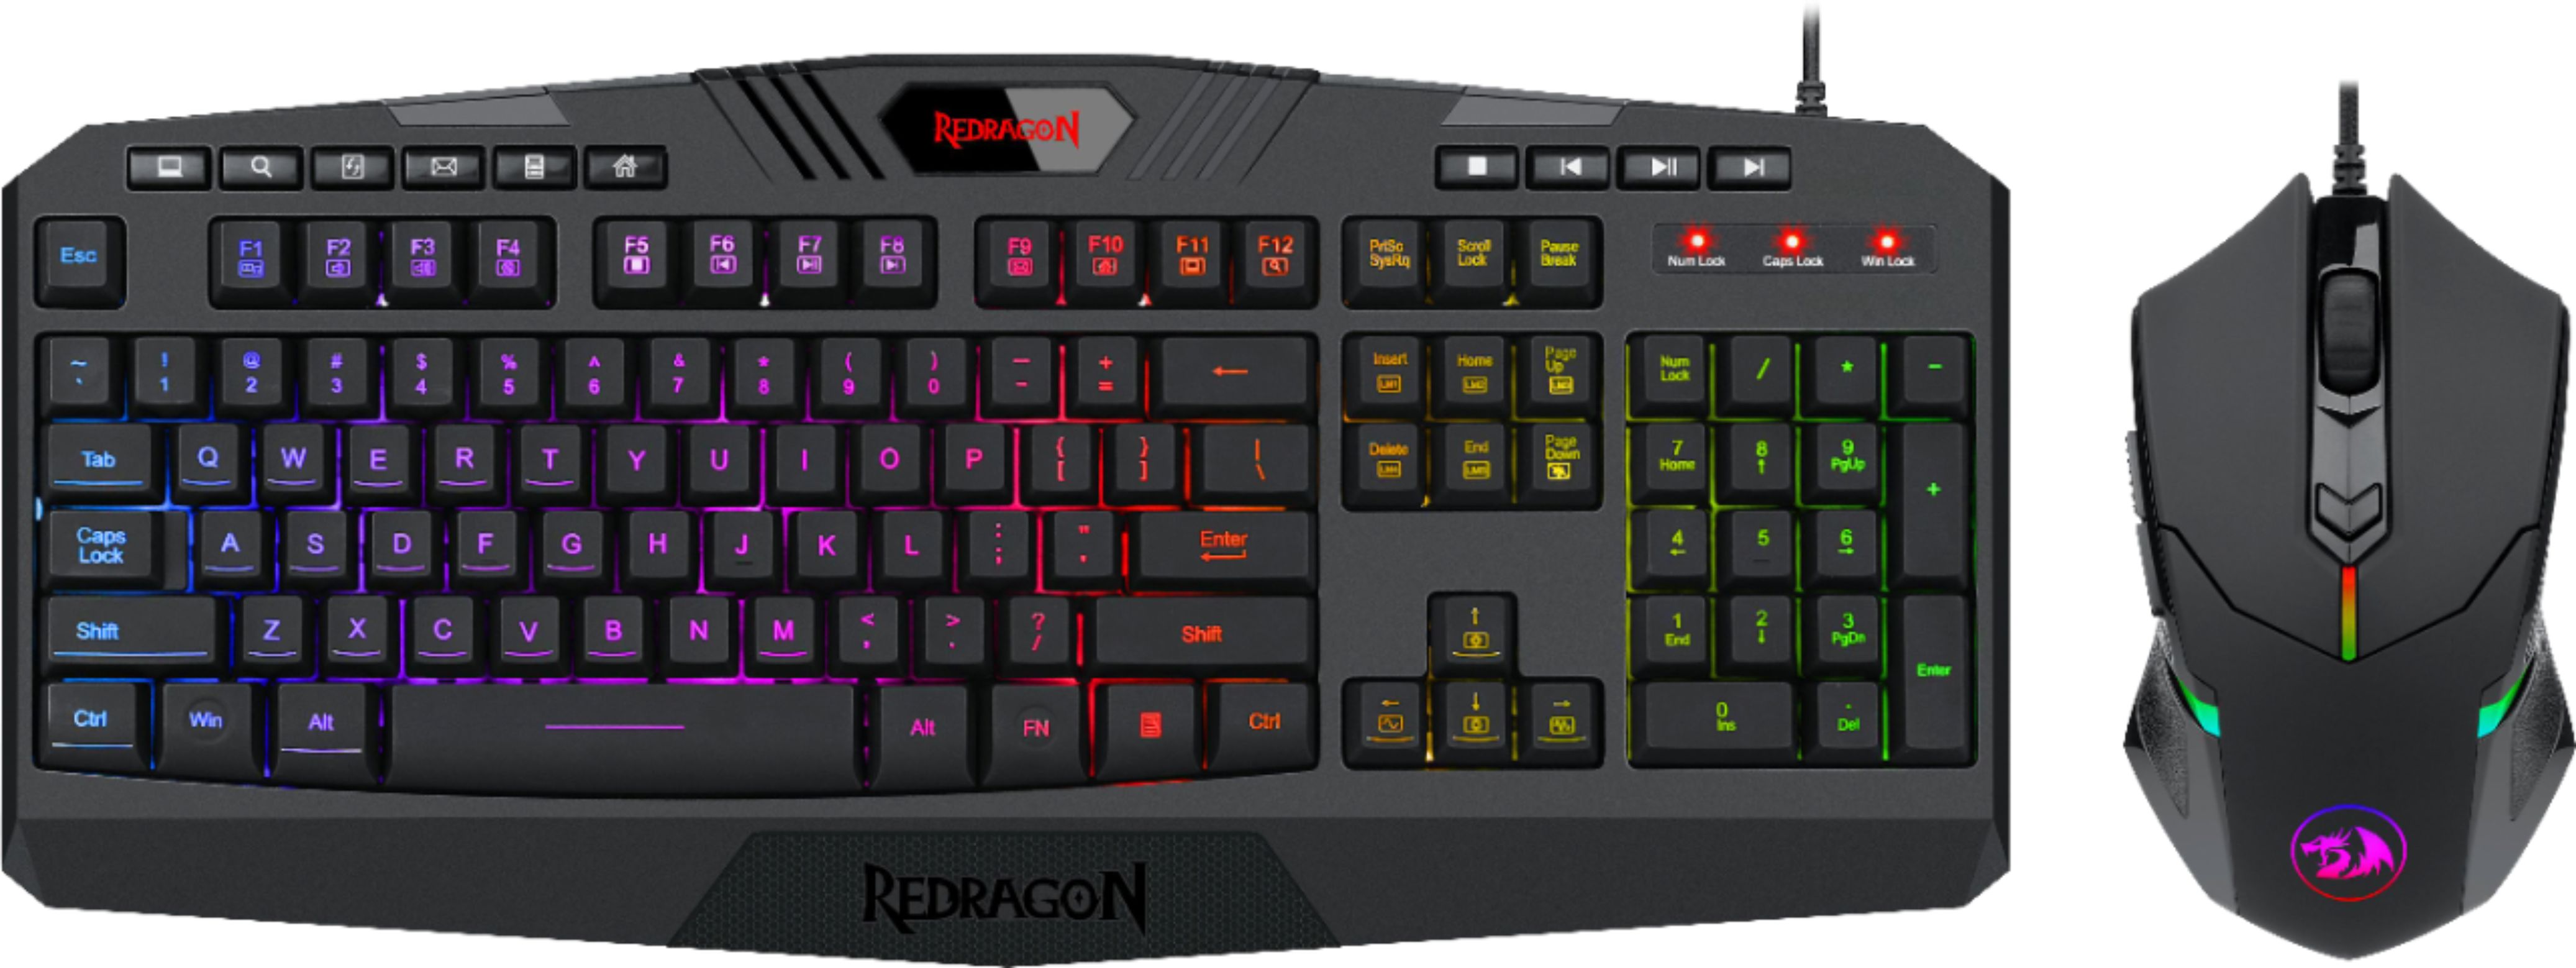 REDRAGON S101-5 Wired Gaming Keyboard and Optical Mouse Gaming Bundle with RGB Backlighting S101-5 - Best Buy